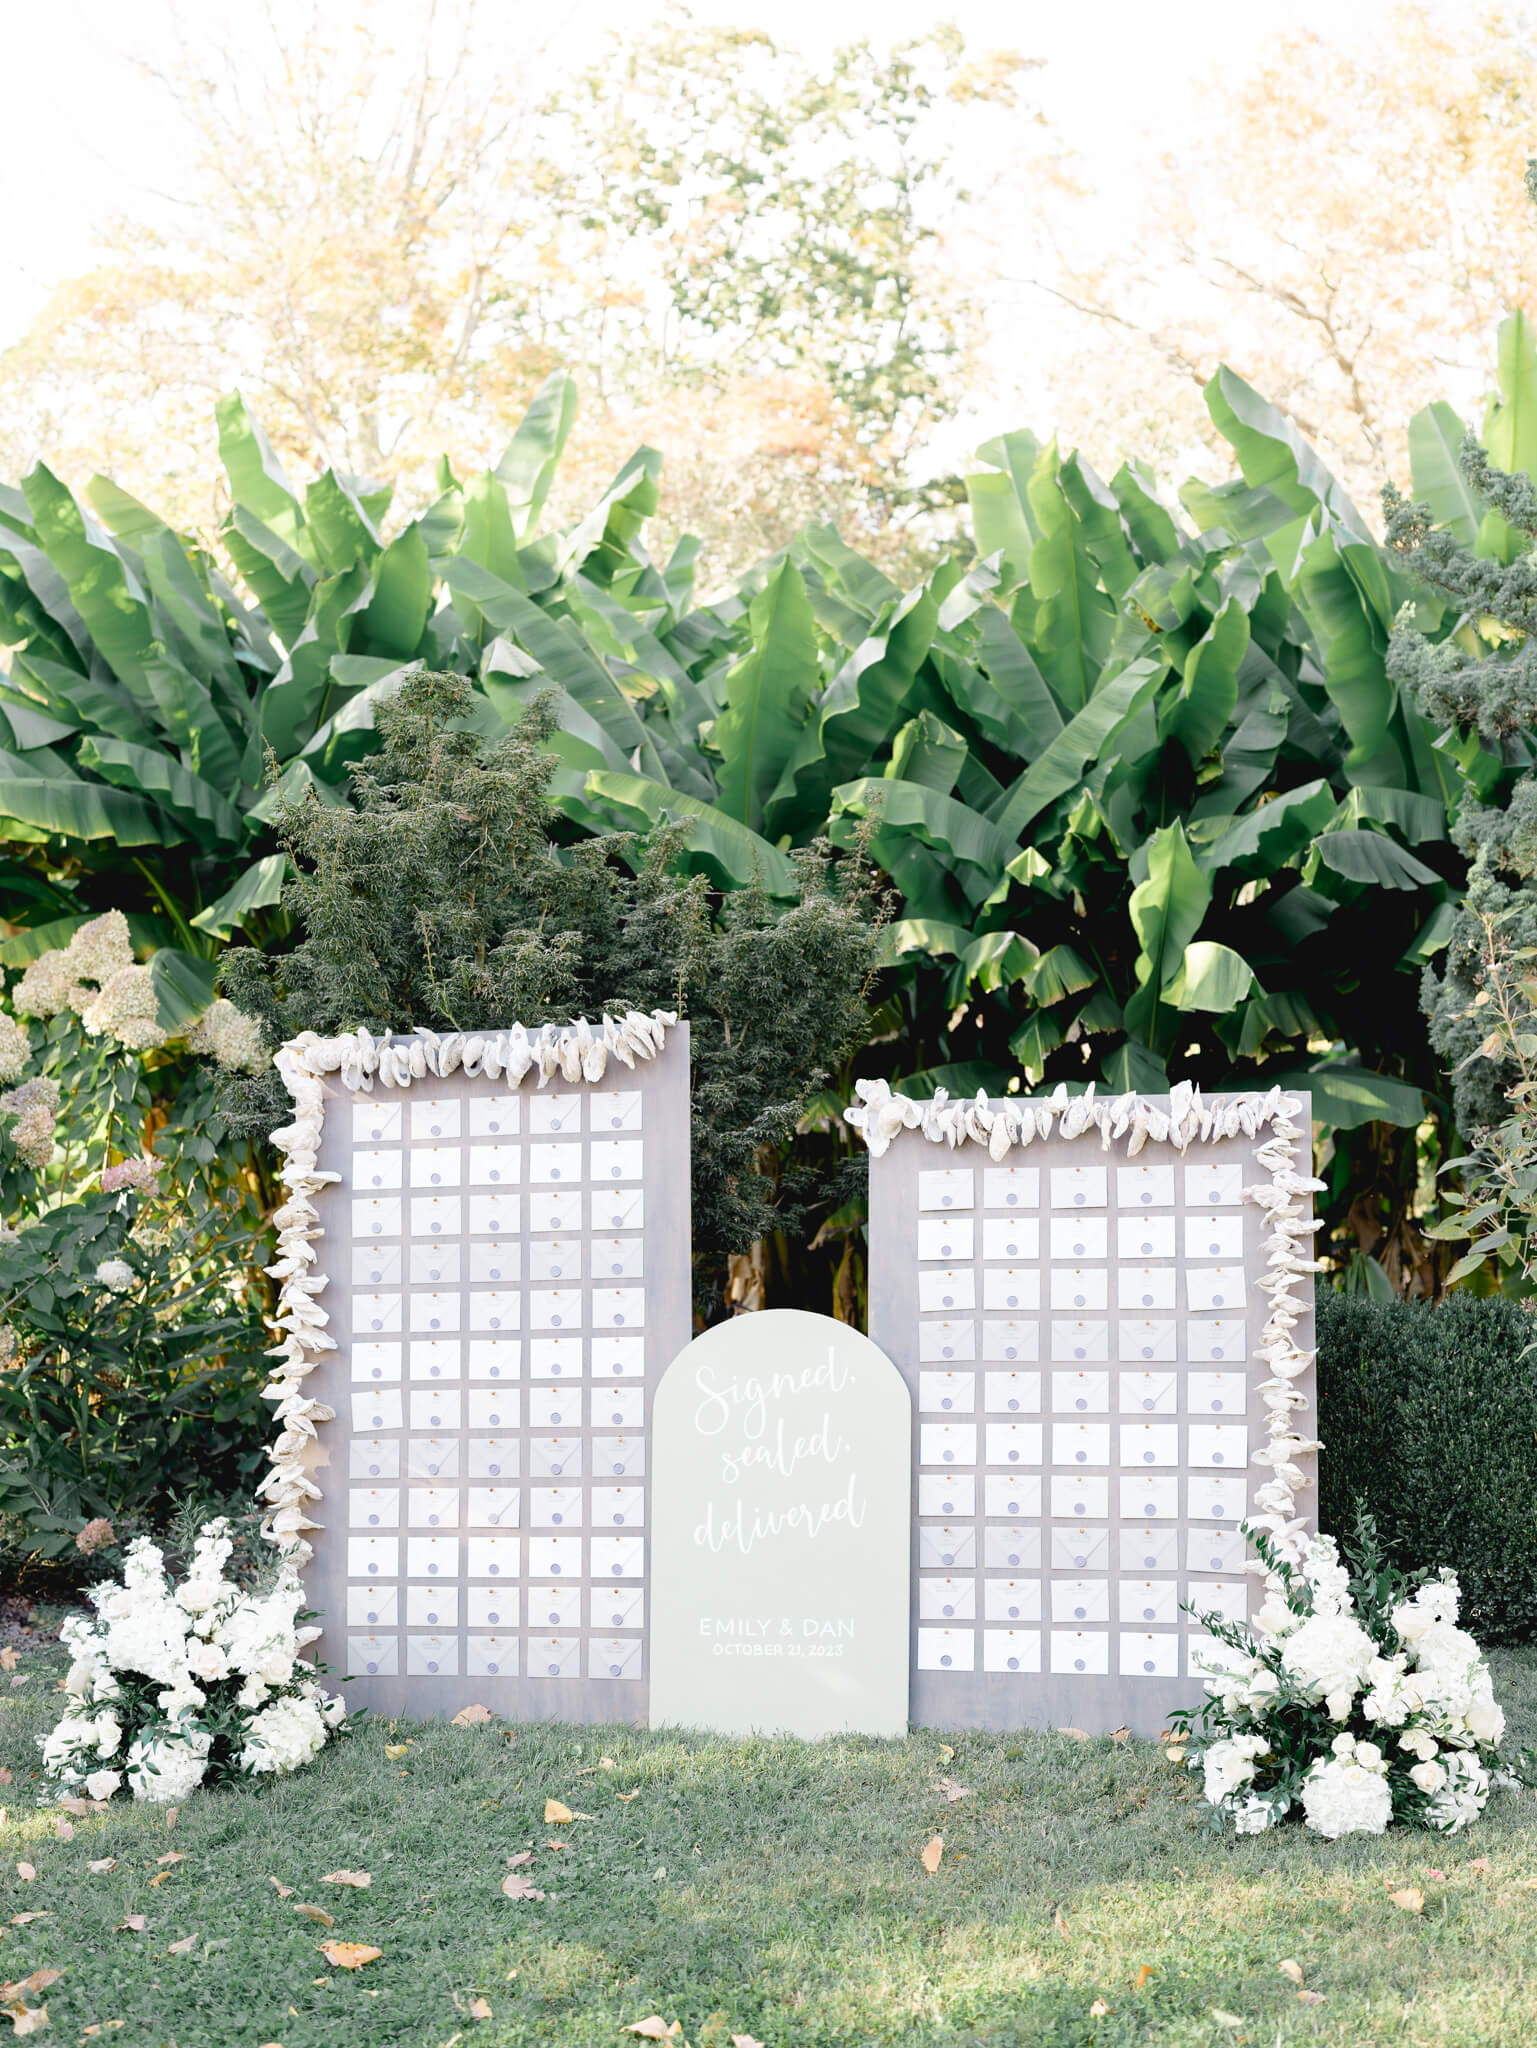 A gray escort chart made with oysters and envelopes standing in front of the banana plants at River Farm Wedding Venue.